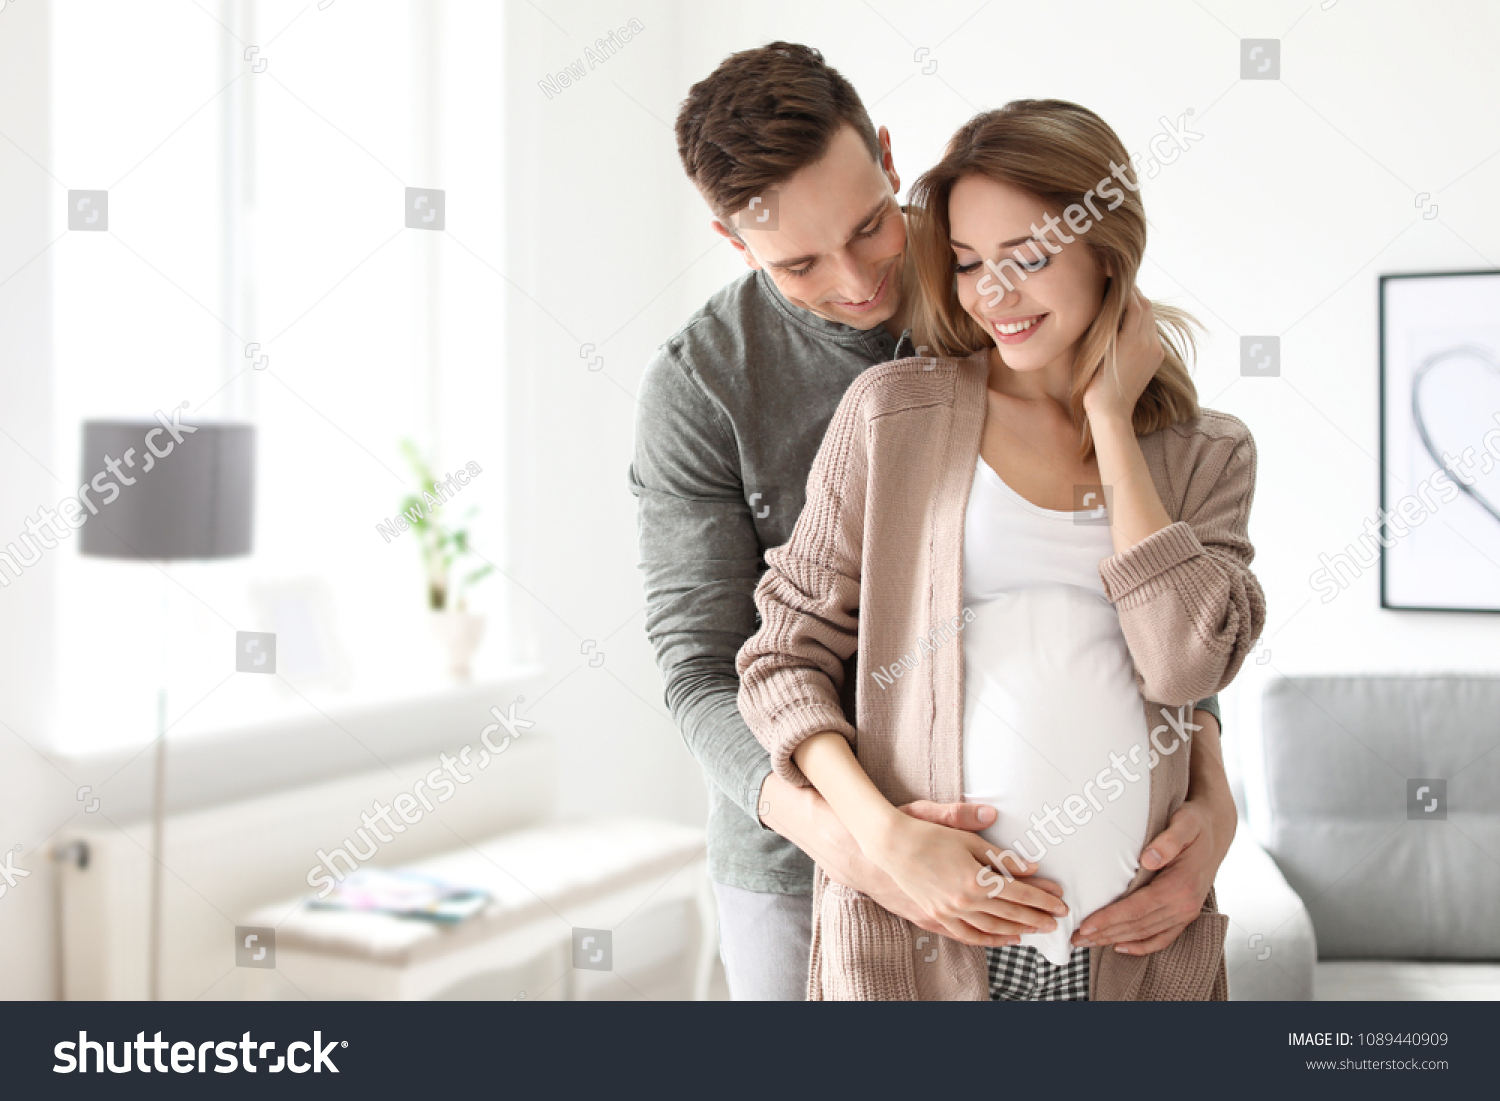 stock-photo-young-pregnant-woman-with-her-husband-at-home-1089440909 (1)